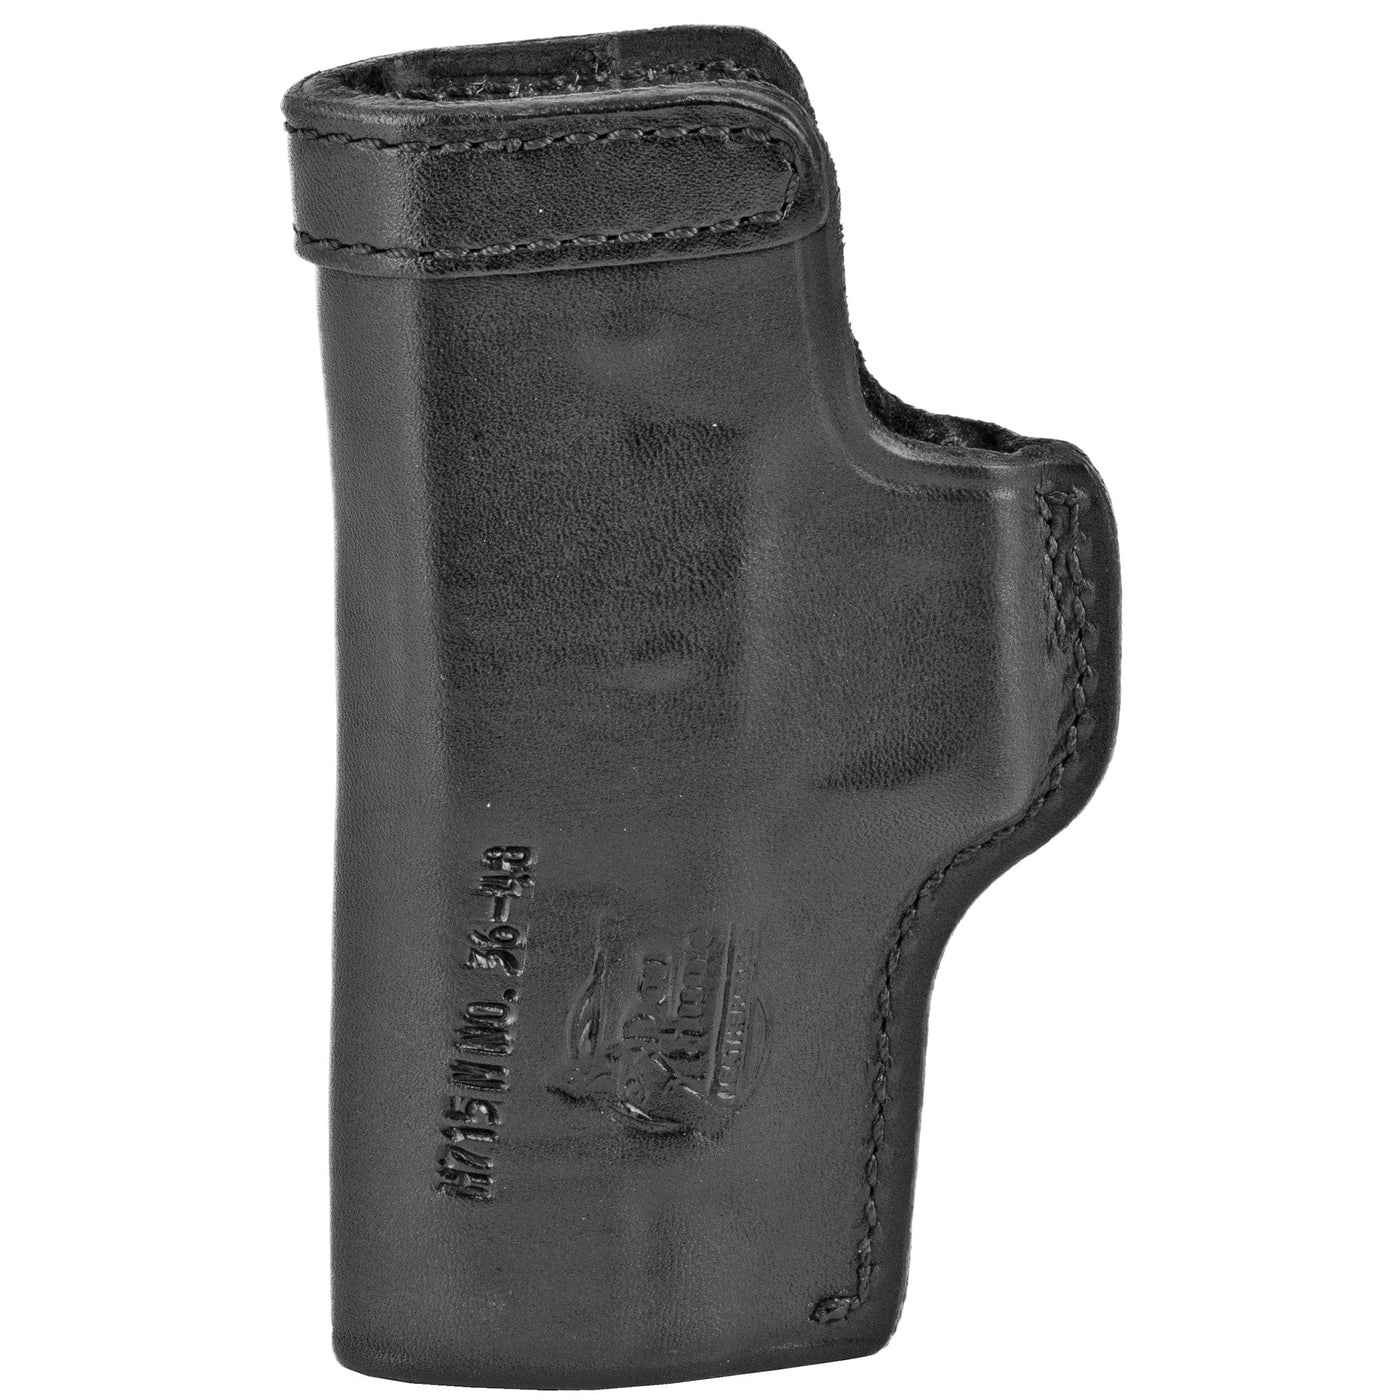 Don Hume D Hume H715-m For Glk 48 Black / Right Hand Holsters